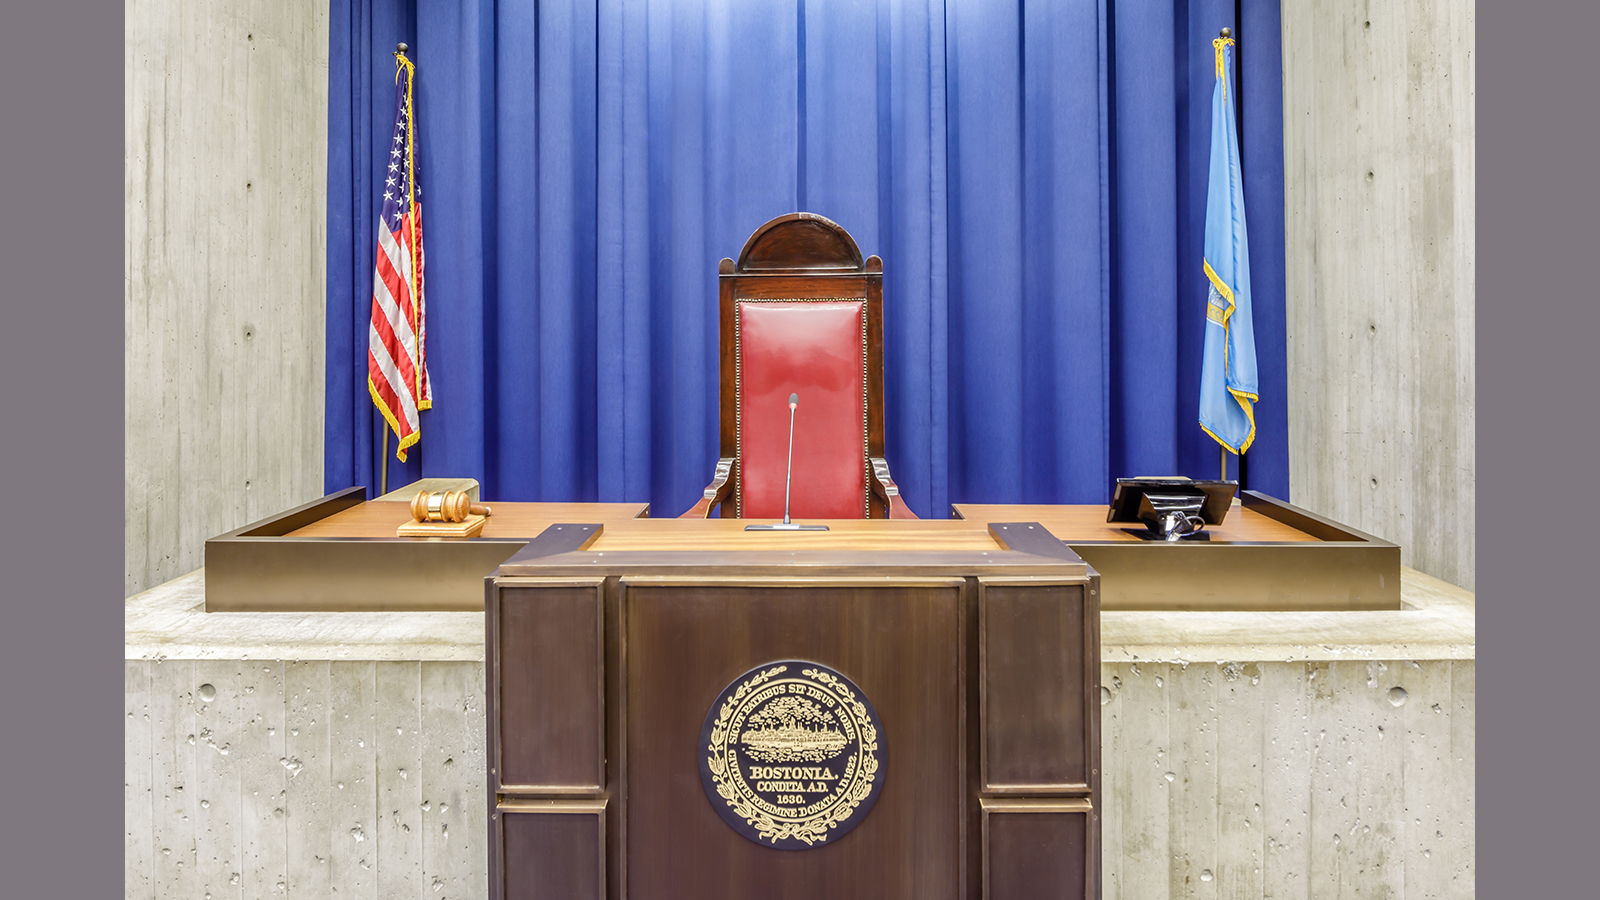 Boston City Hall Council Chamber, desk with Boston seal